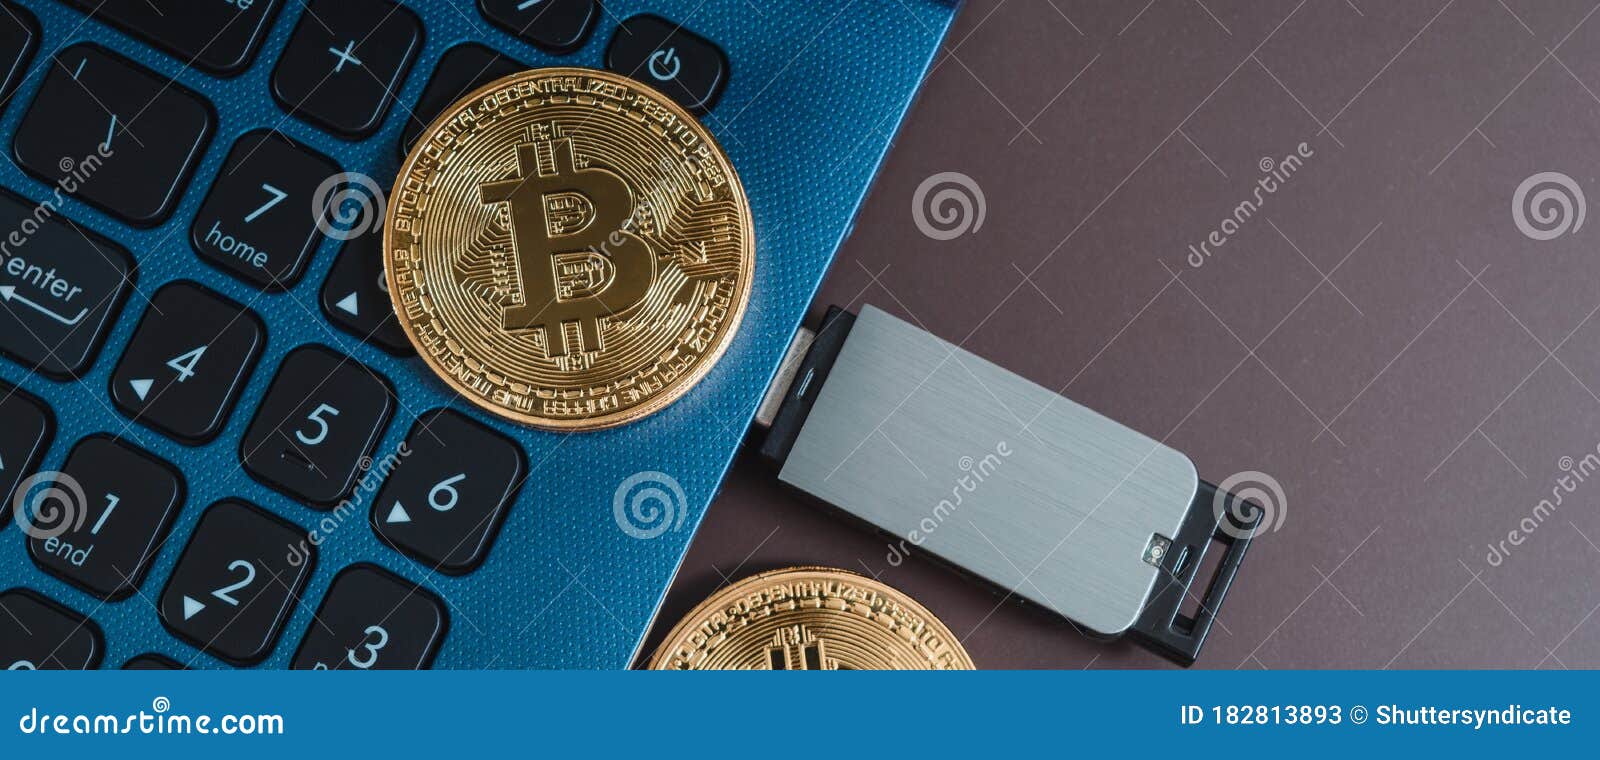 buy bitcoin with ledger